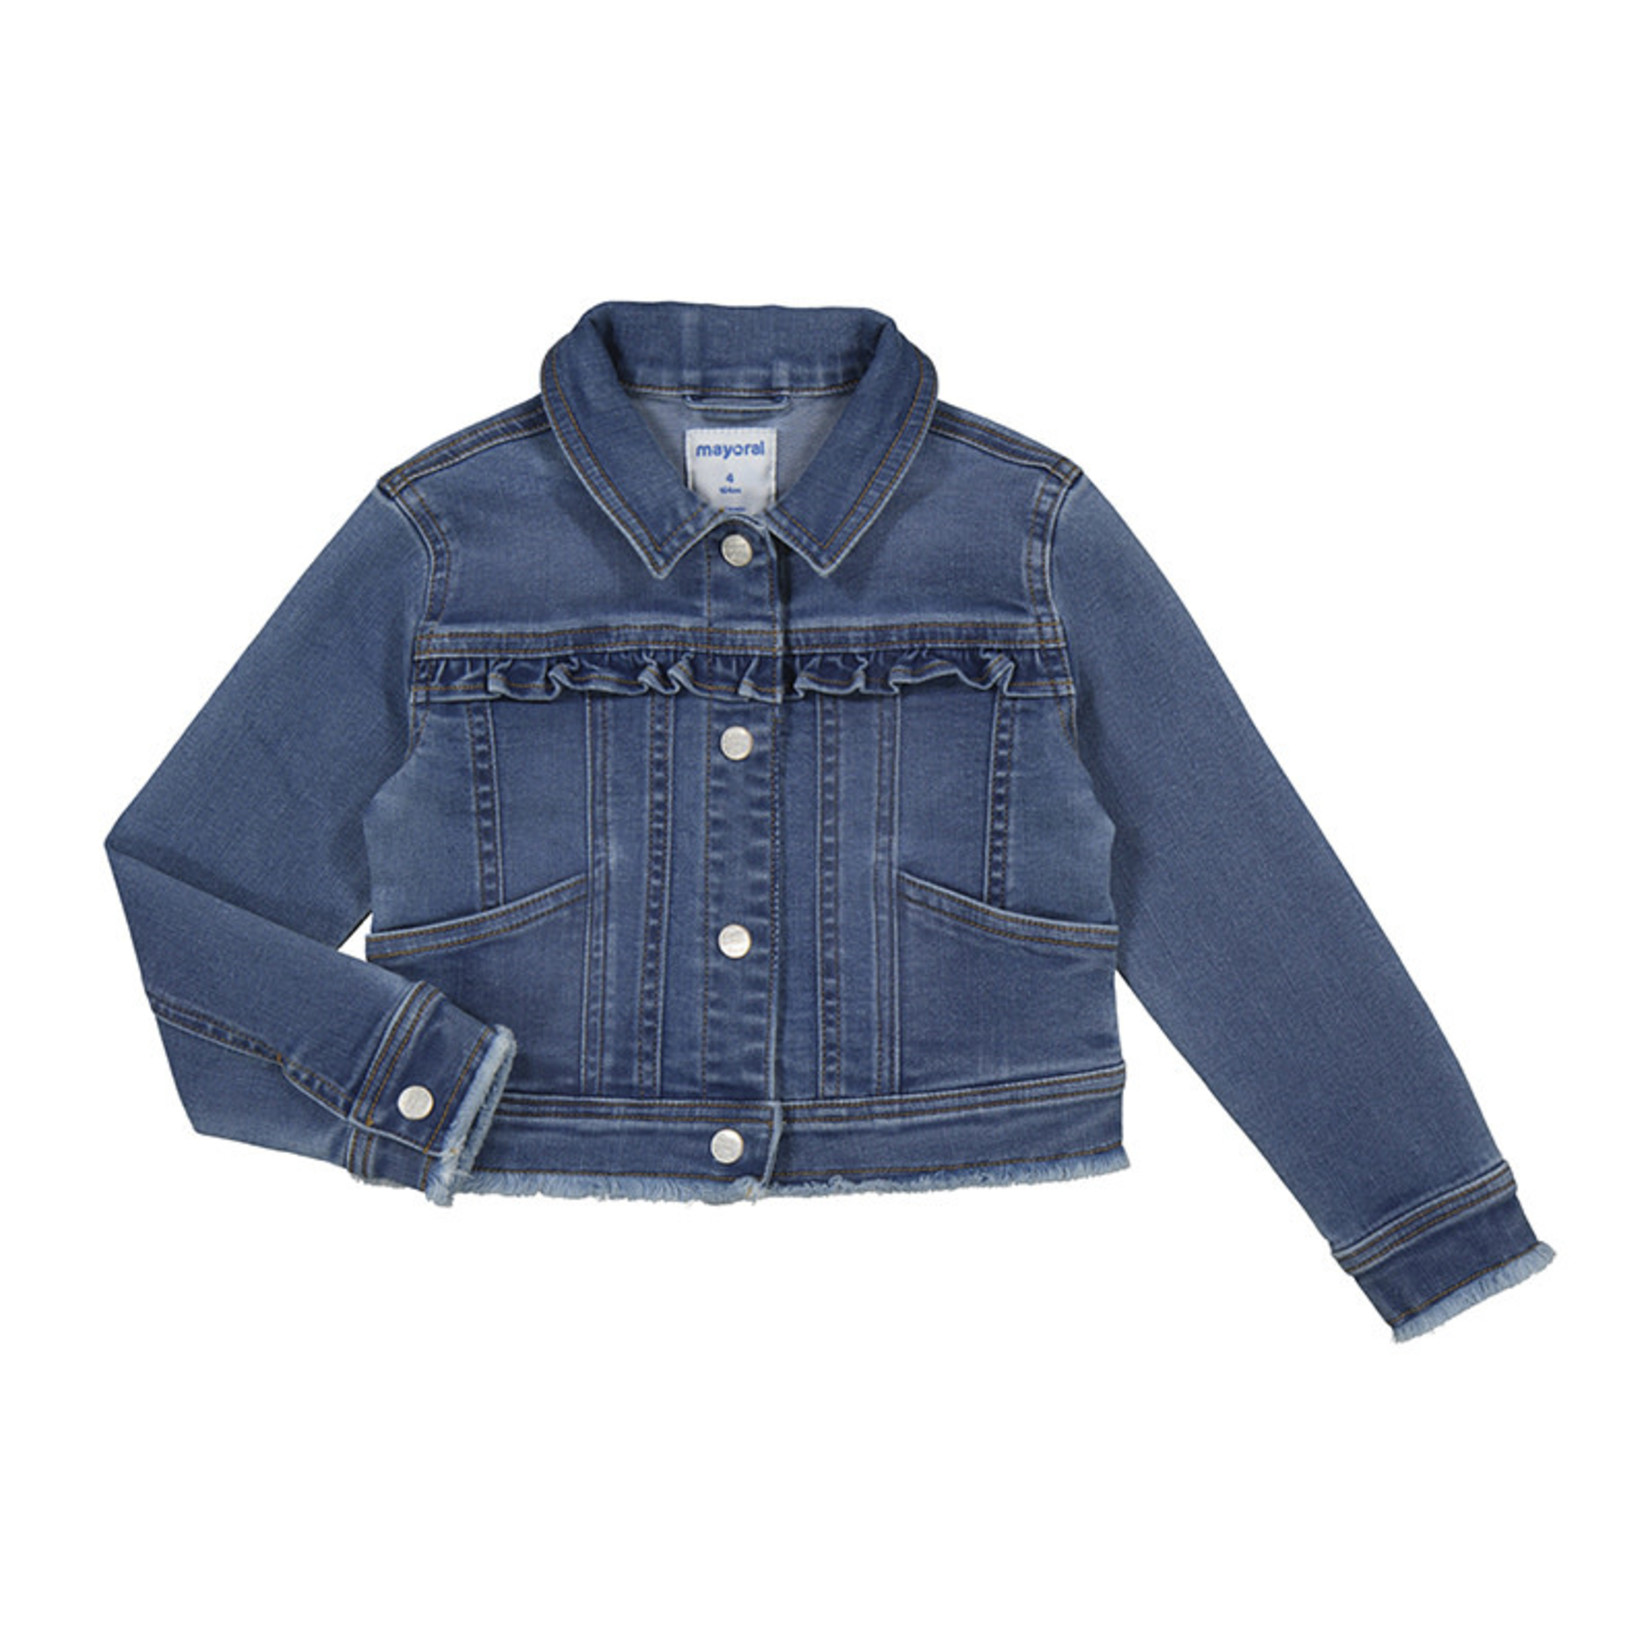 Mayoral Jeans Jackets  - Mayoral